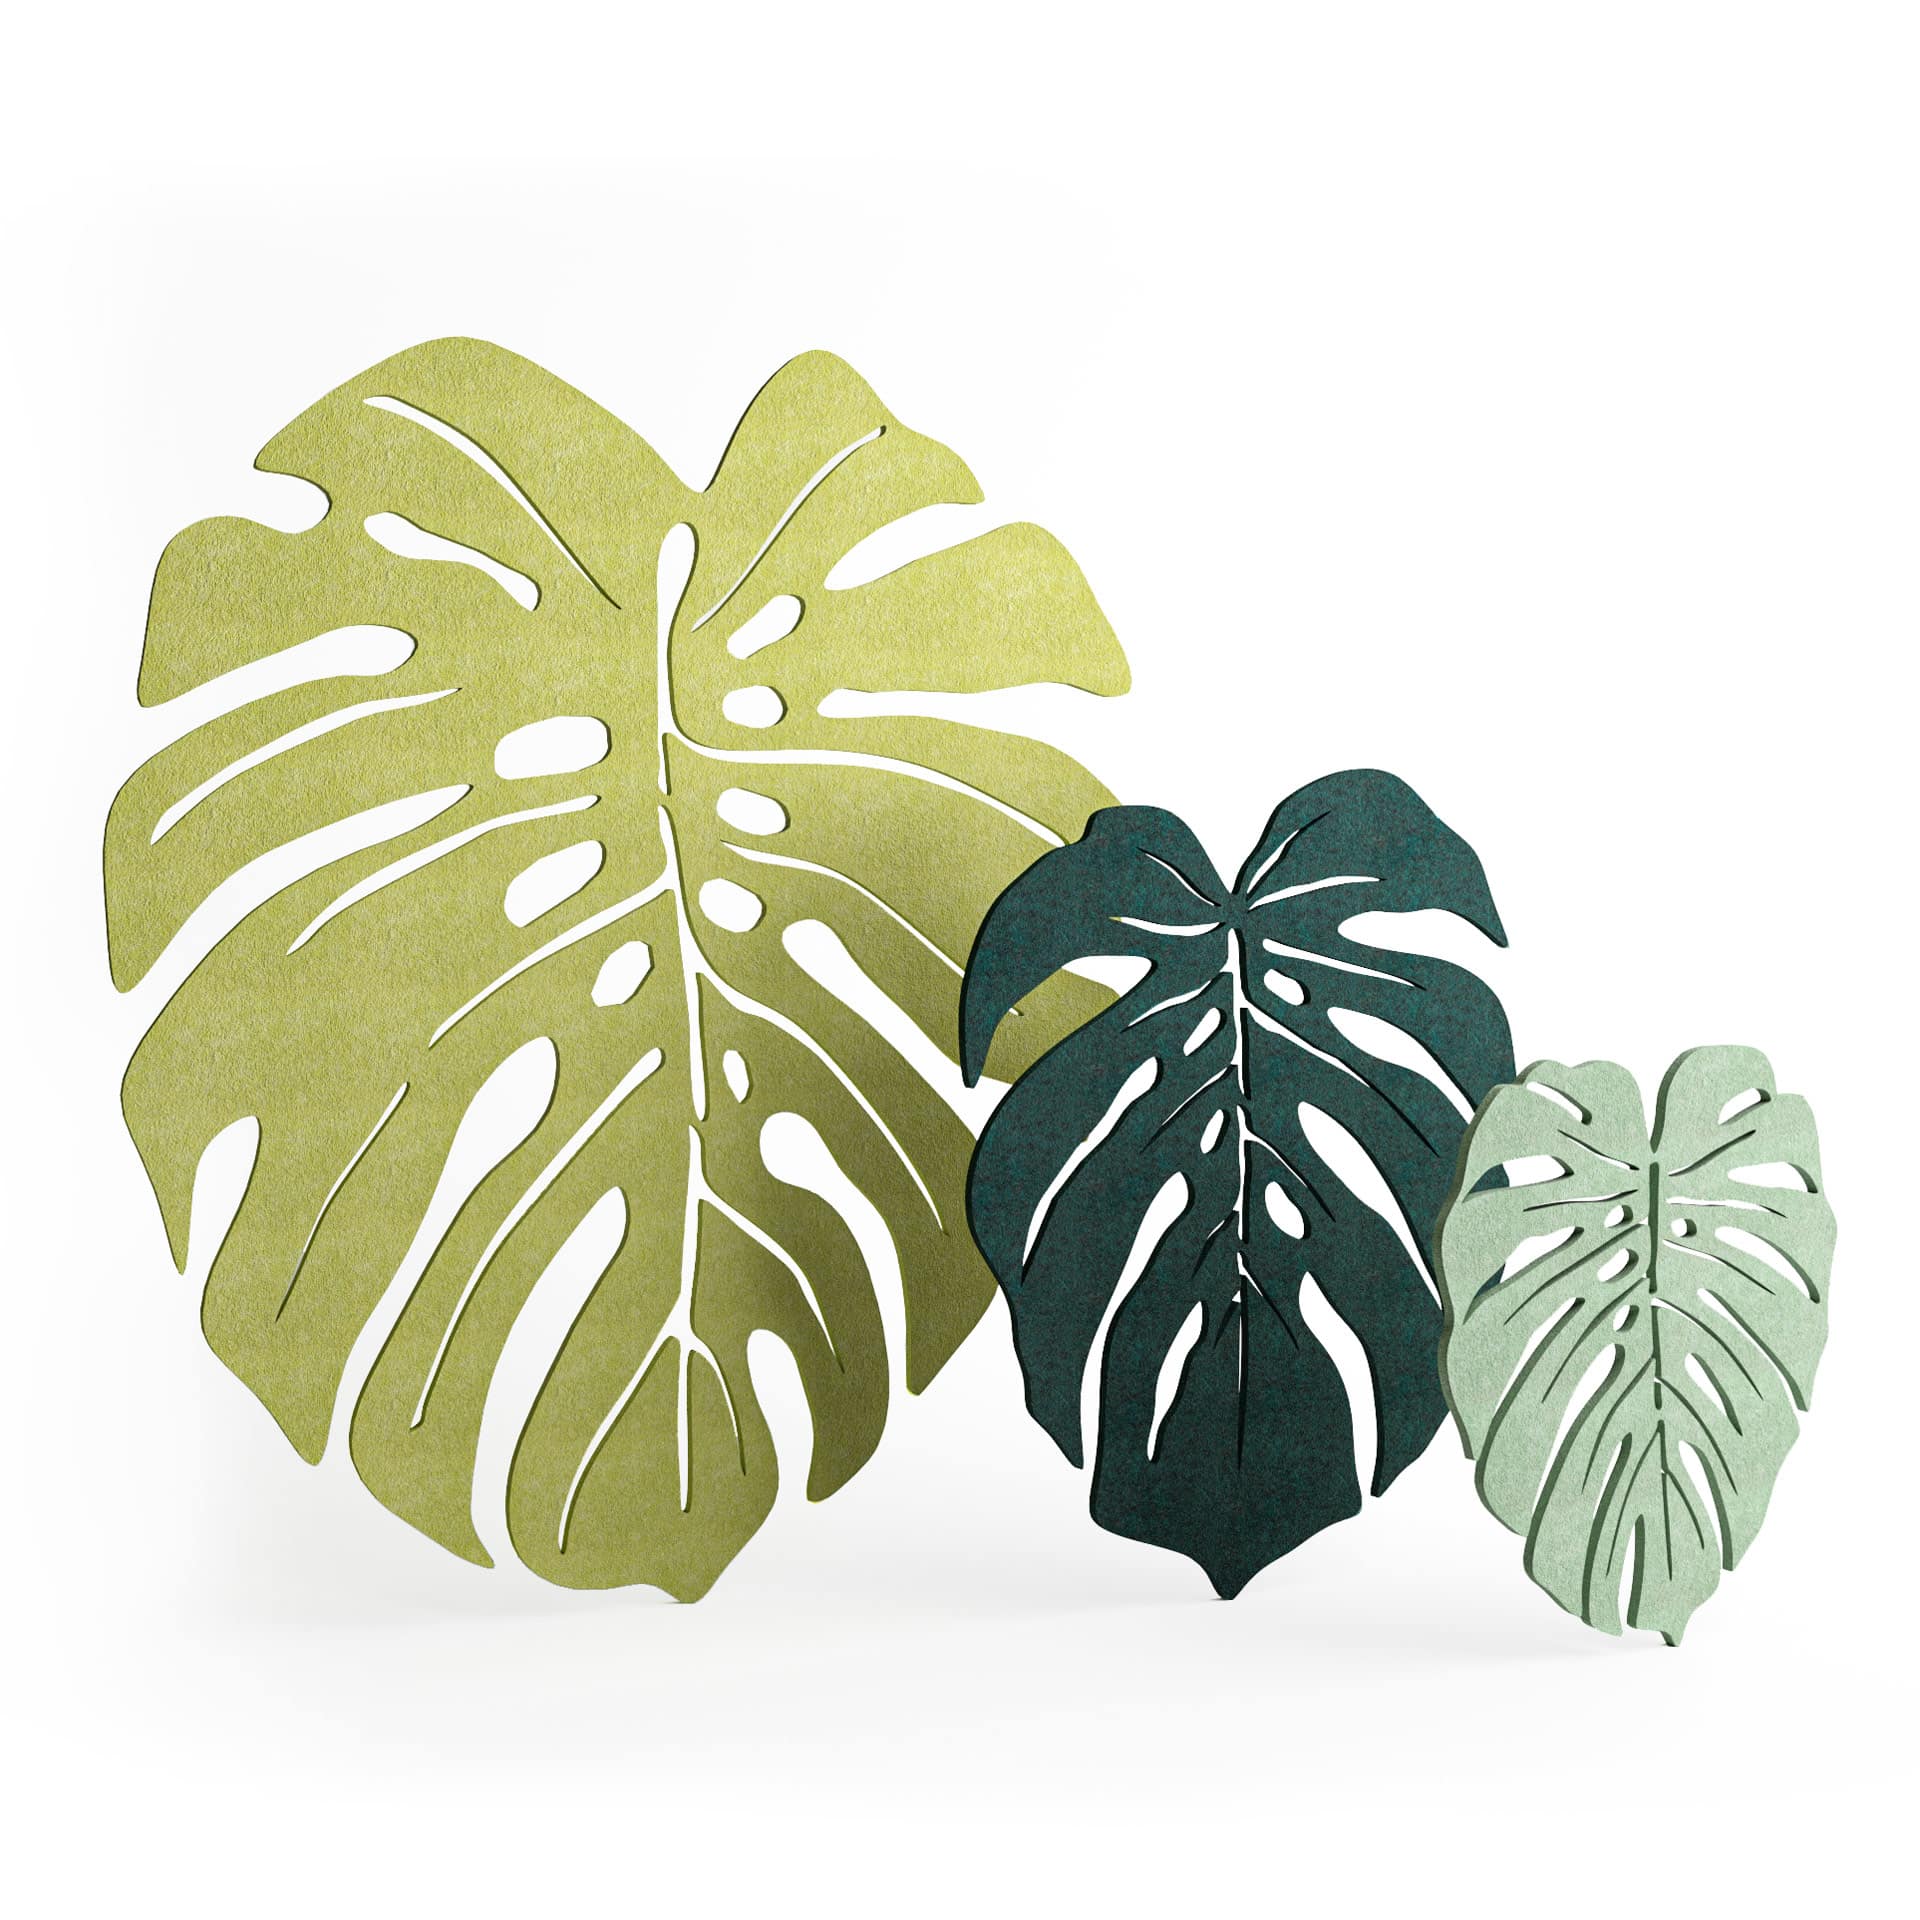 Sound-absorbing decorative wall panels in shape of monstera leaves